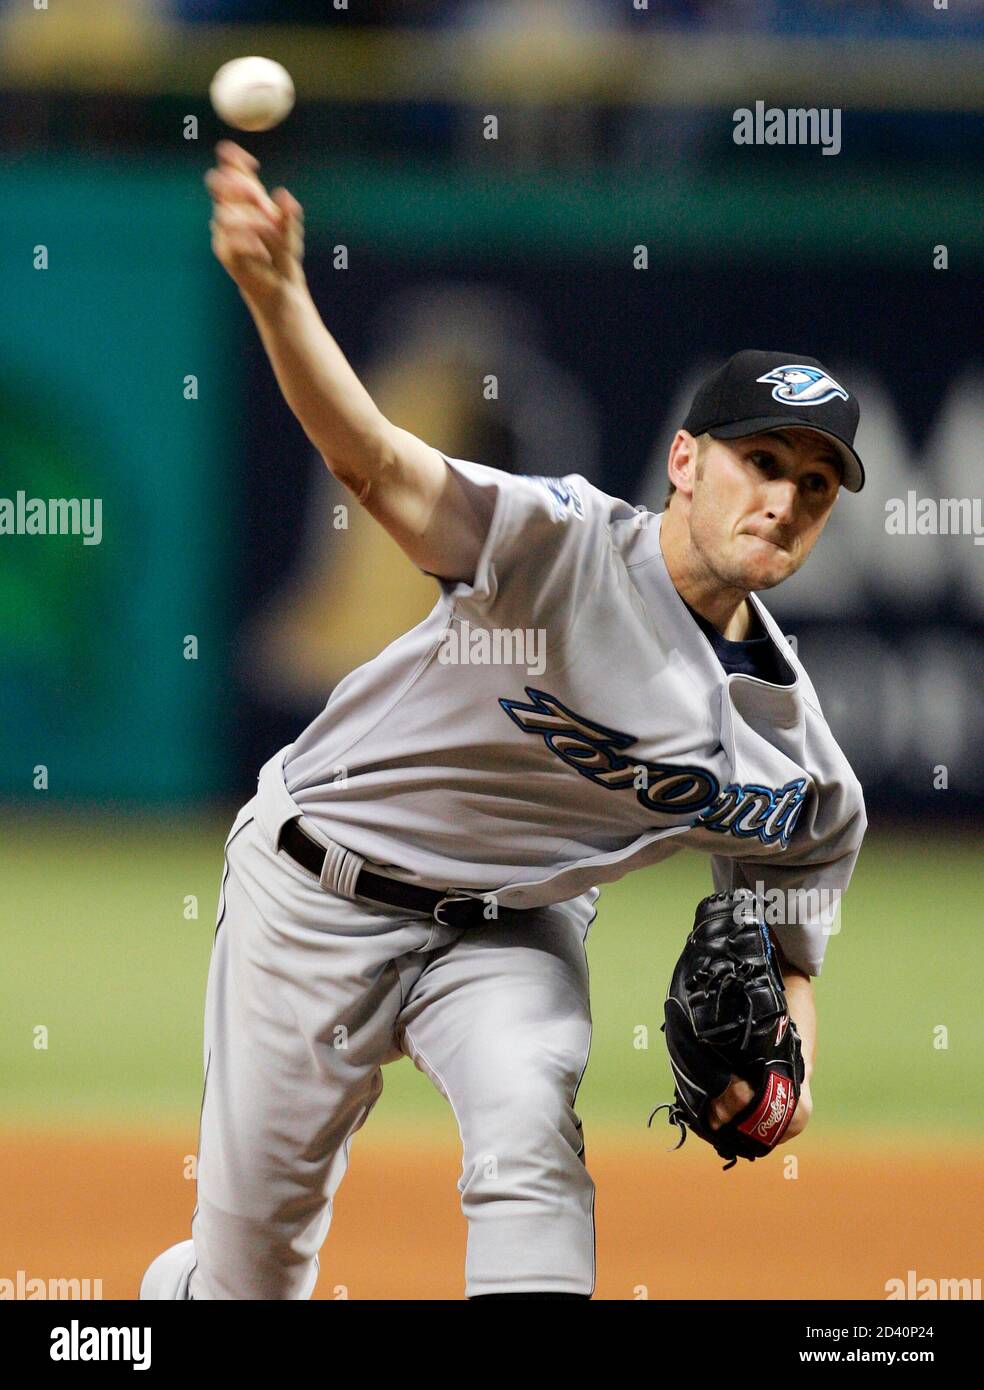 Toronto Blue Jays right handed pitcher Josh Towers throws from the mound against the Tampa Bay Devil Rays during the fifth inning at Tropicana Field in St.Petersburg, Florida, April 6, 2005. REUTERS/Scott Audette  SAA Stock Photo